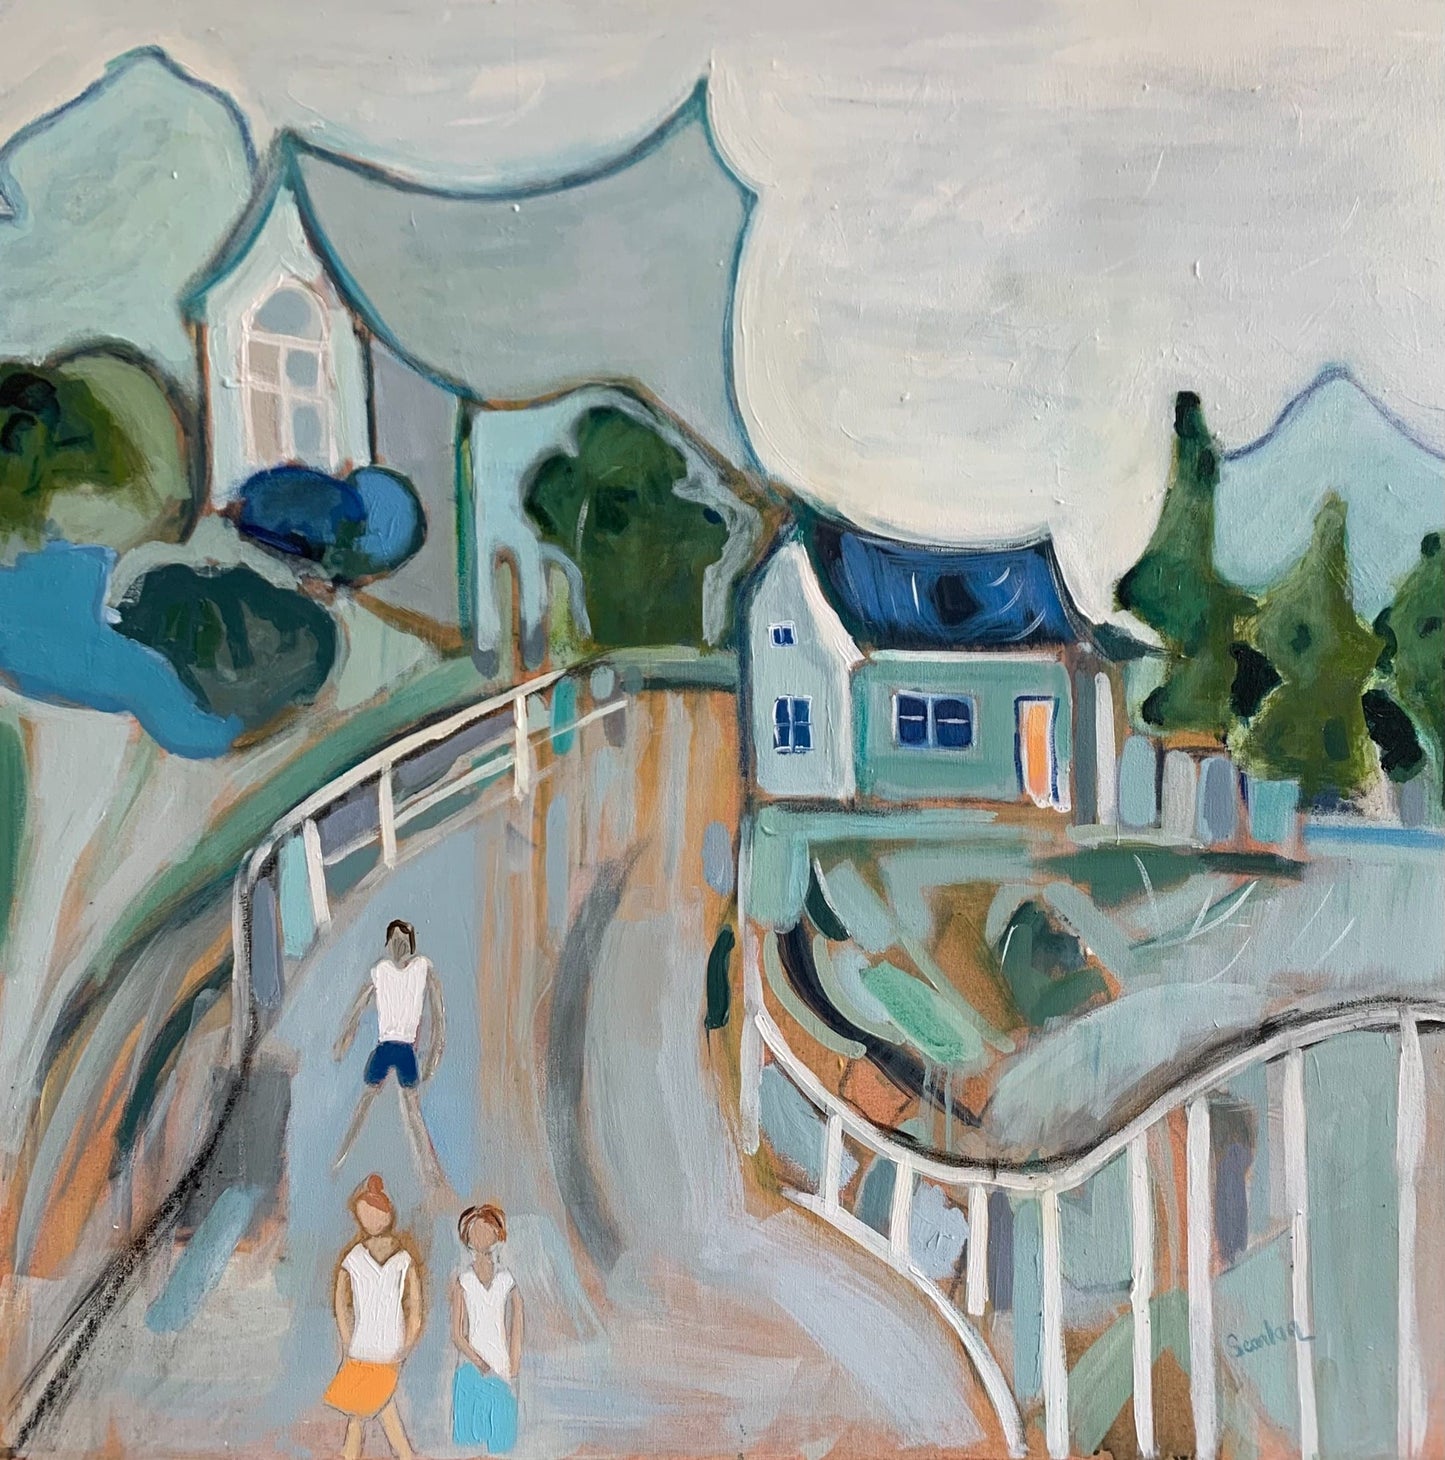 Acrylic artwork titled Malbaie, Quebec